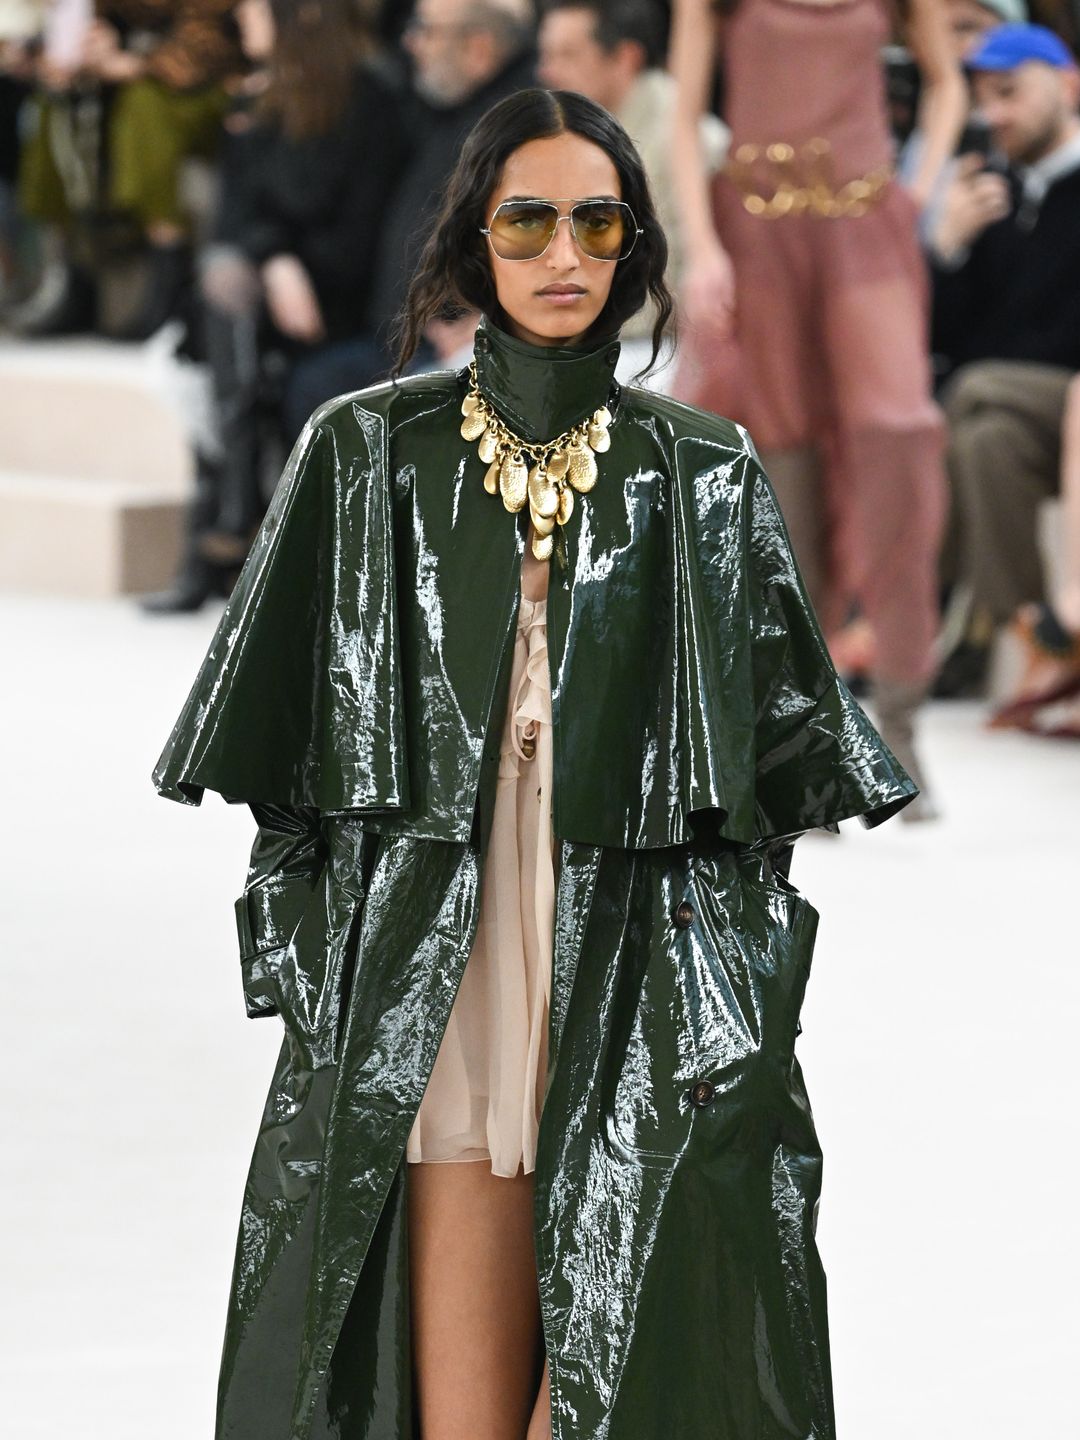 A model walks the runway during the Chloé Womenswear show in a patent green trench coat